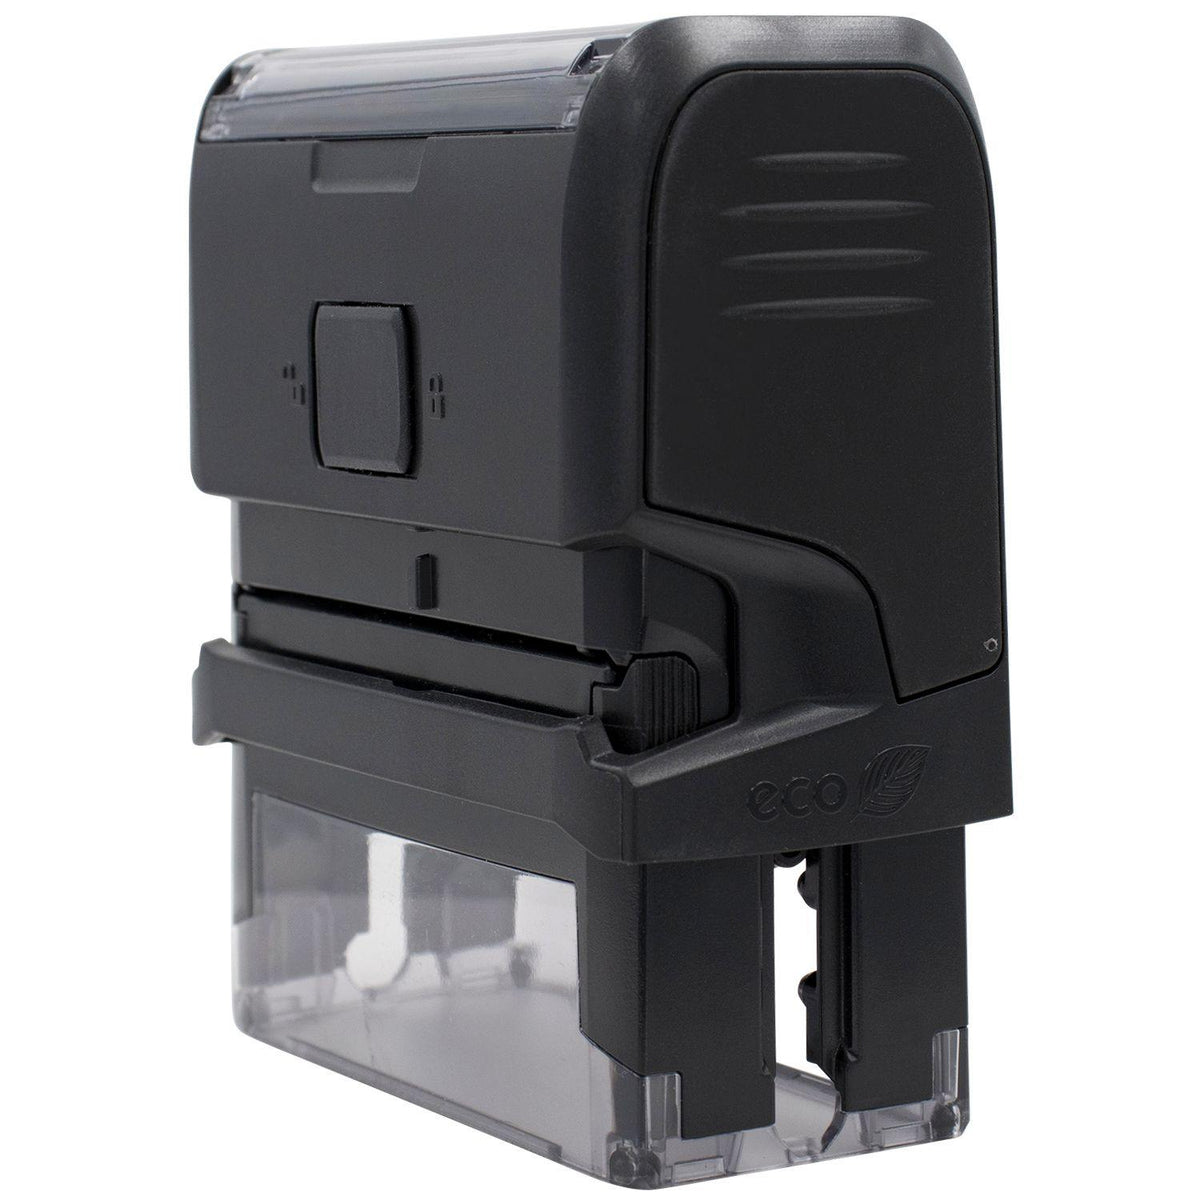 Large Self Inking Diabetic Stamp - Engineer Seal Stamps - Brand_Trodat, Impression Size_Large, Stamp Type_Self-Inking Stamp, Type of Use_Medical Office